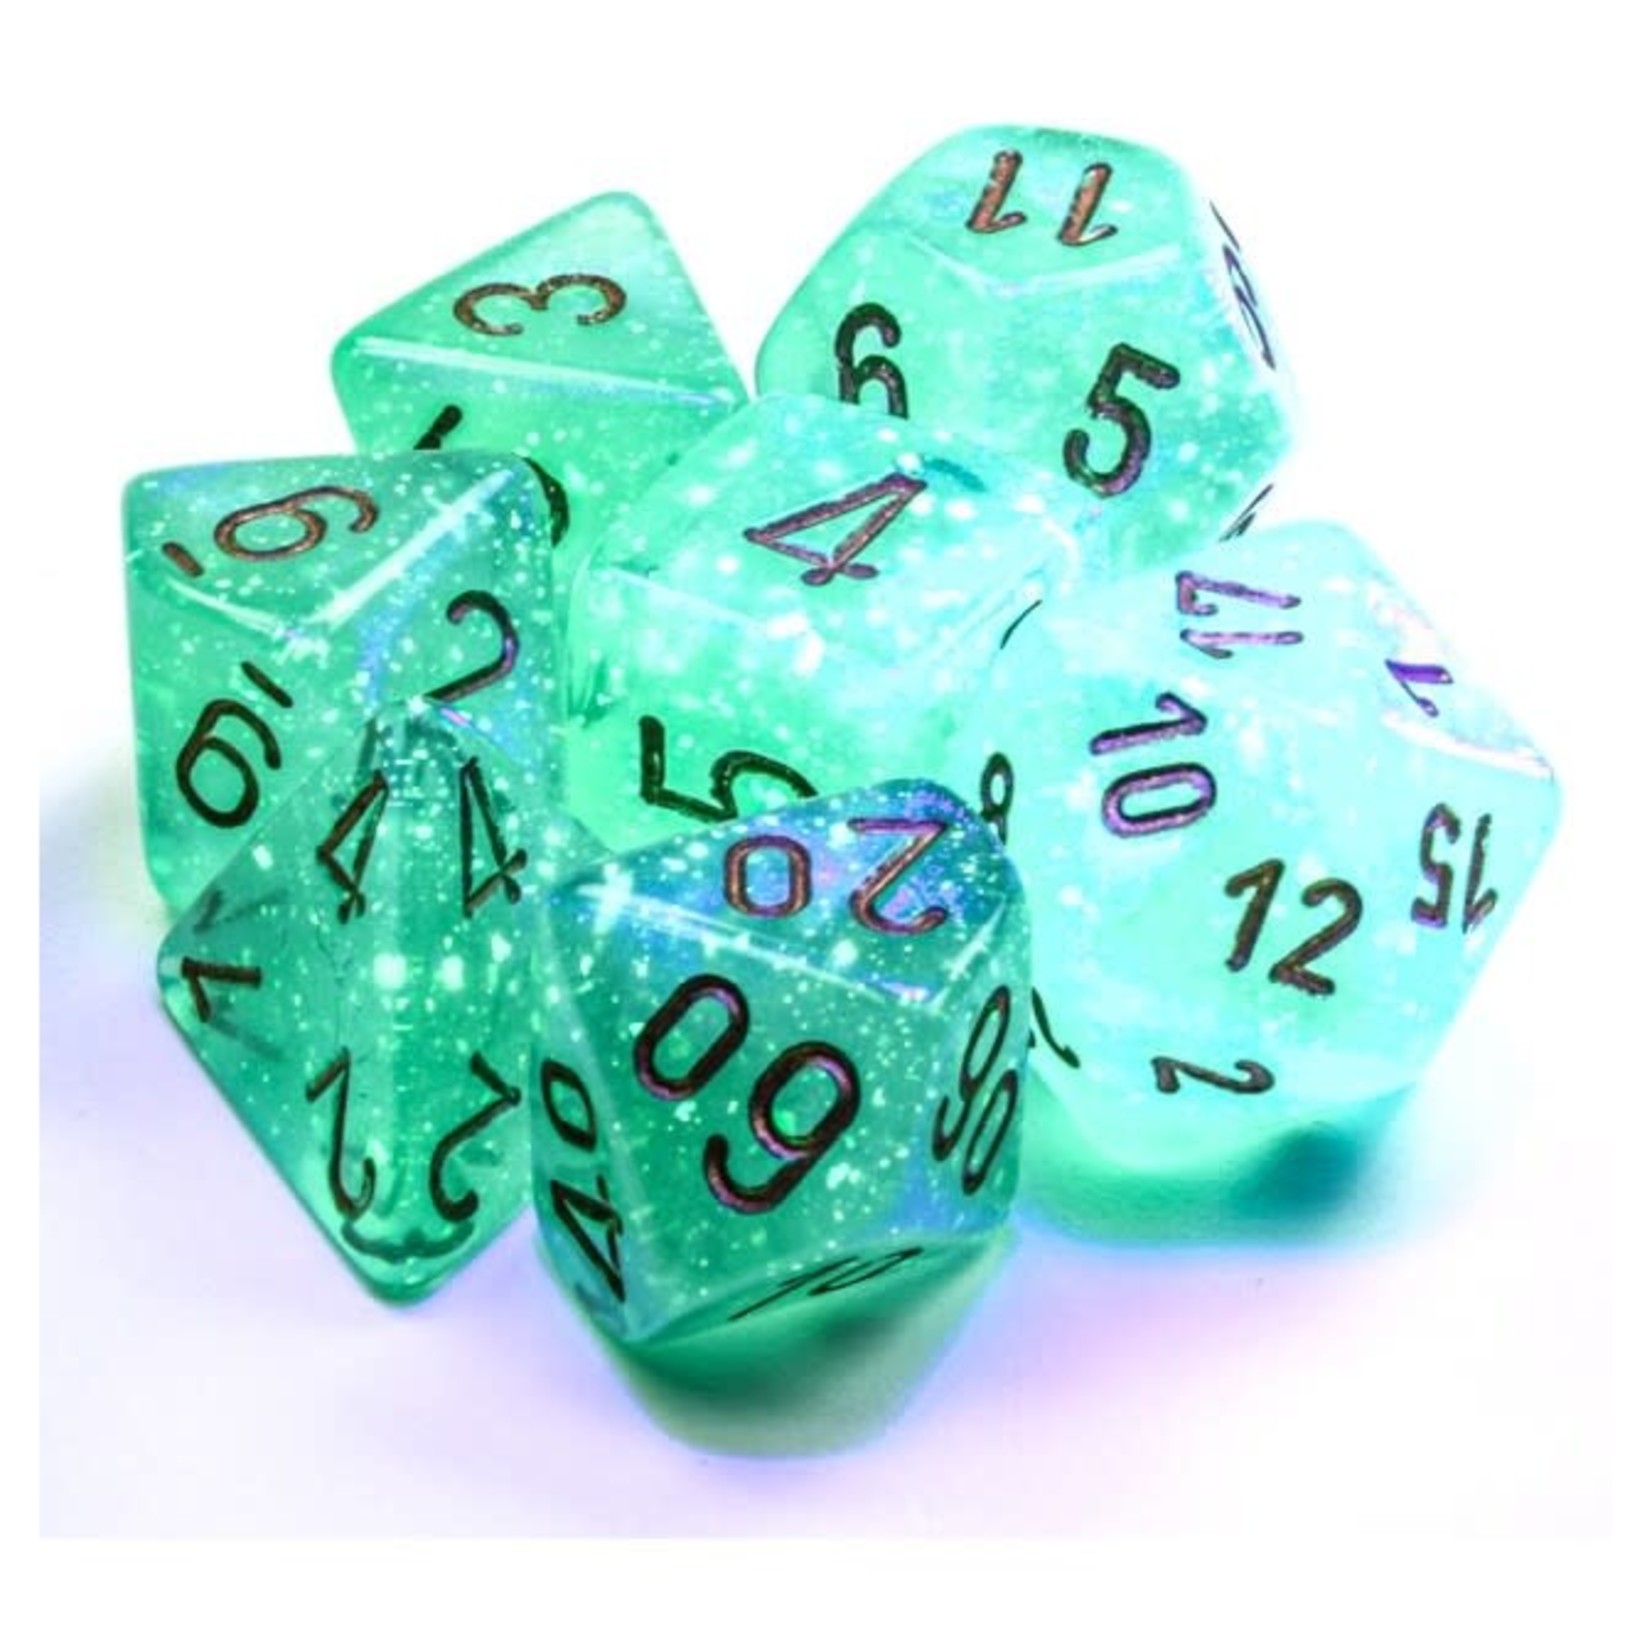 Chessex Chessex Borealis Light Green with Gold Polyhedral 7 die set